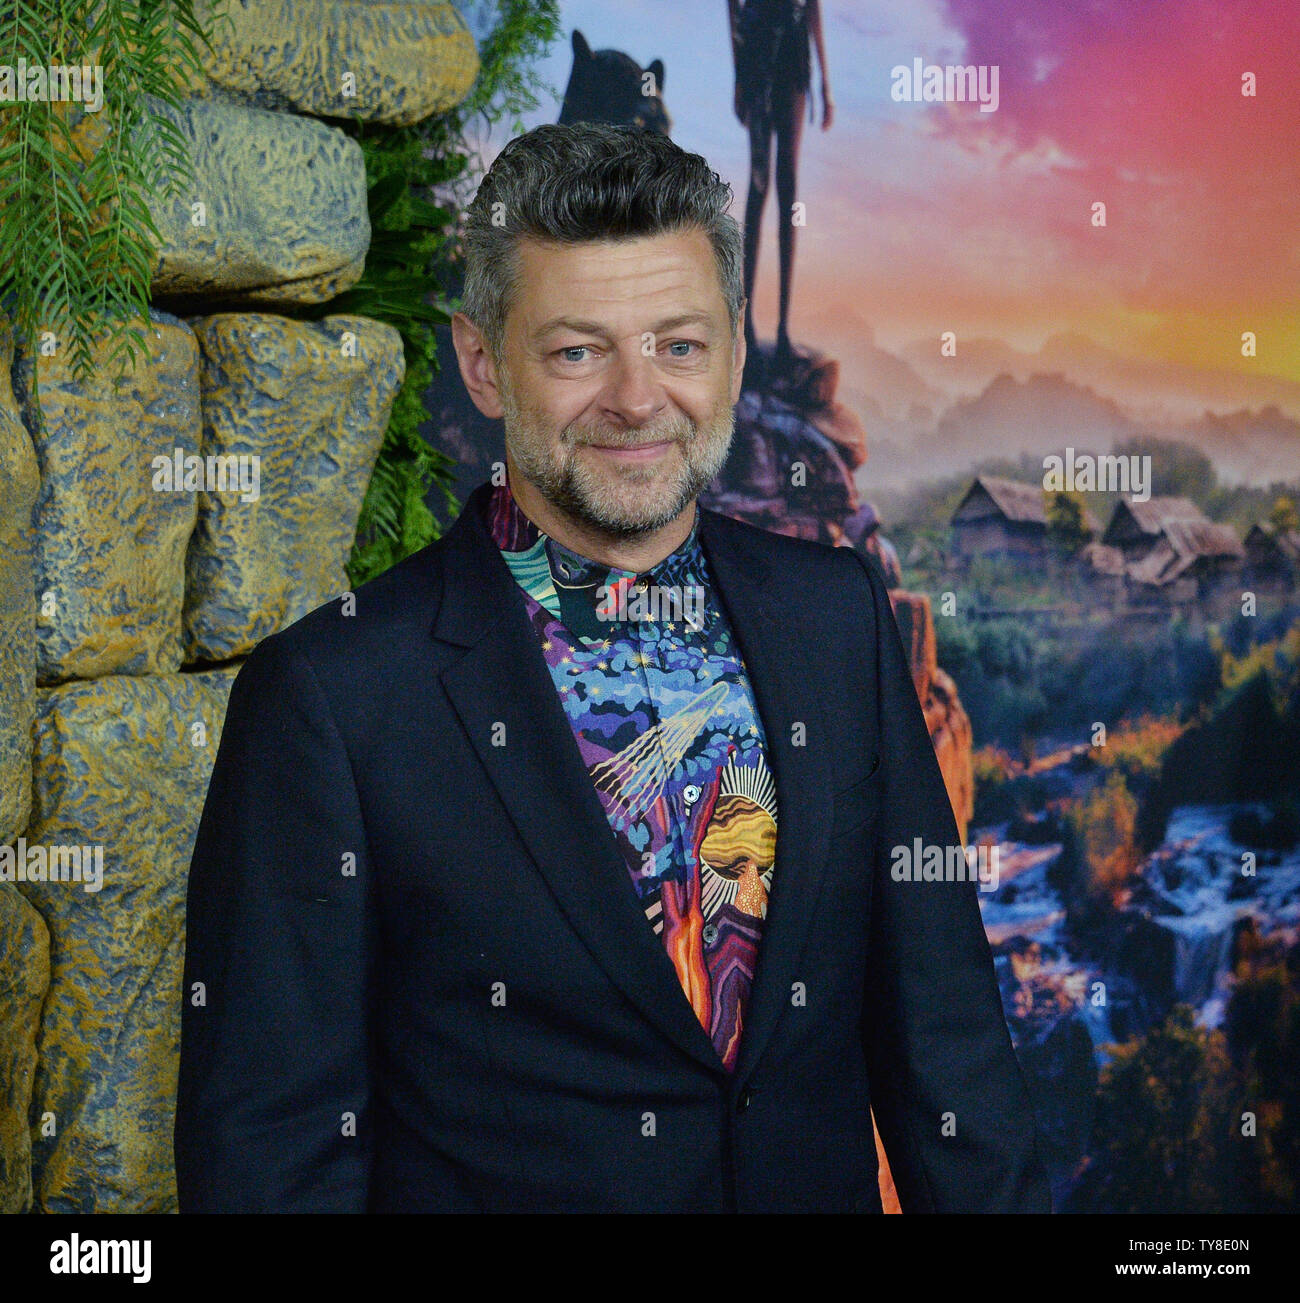 Director Andy Serkis attends the premiere of the motion picture drama 'Mowgli: Legend of the Jungle' at the ArcLight Cinema Dome in the Hollywood section of Los Angeles on November 28, 2018. Based on the novel by Rudyard Kipling The story follows the upbringing of the human child Mowgli raised by a pack of wolves in the jungles of India. As he learns the often harsh rules of the jungle, under the tutelage of a bear named Baloo and a black panther named Bagheera, Mowgli becomes accepted by the animals of the jungle as one of their own, except for one; the fearsome tiger Shere Khan. But there ma Stock Photo